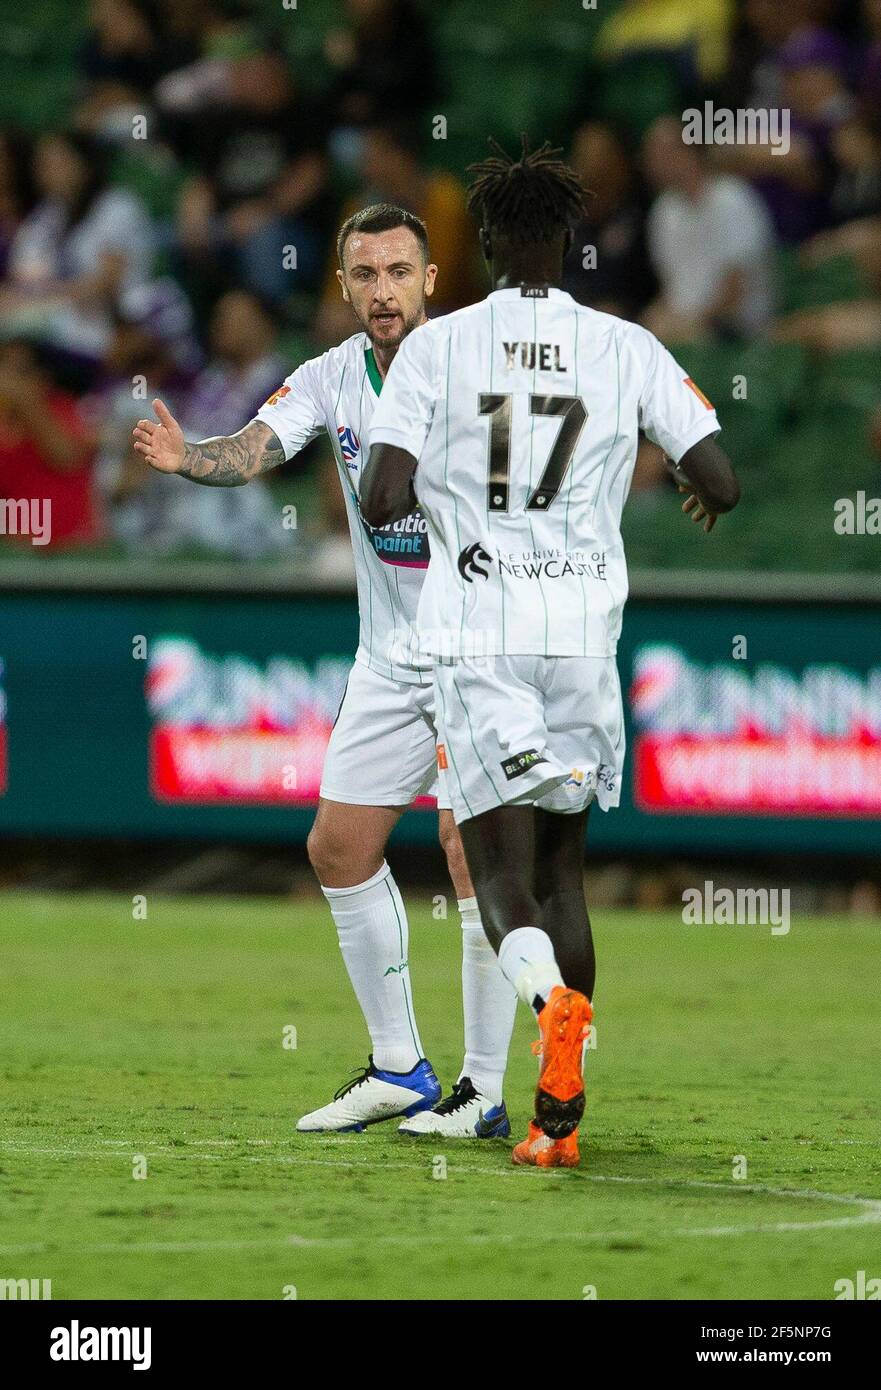 27th March 2021; HBF Park, Perth, Western Australia, Australia; A League Football, Perth Glory versus Newcastle Jets; Roy O&#x2019;Donovan of the Newcastle Jets celebrates his goal in the 58th minute to make the score 2-1 in Glory&#x2019;s favour with Kuach Yuel Stock Photo